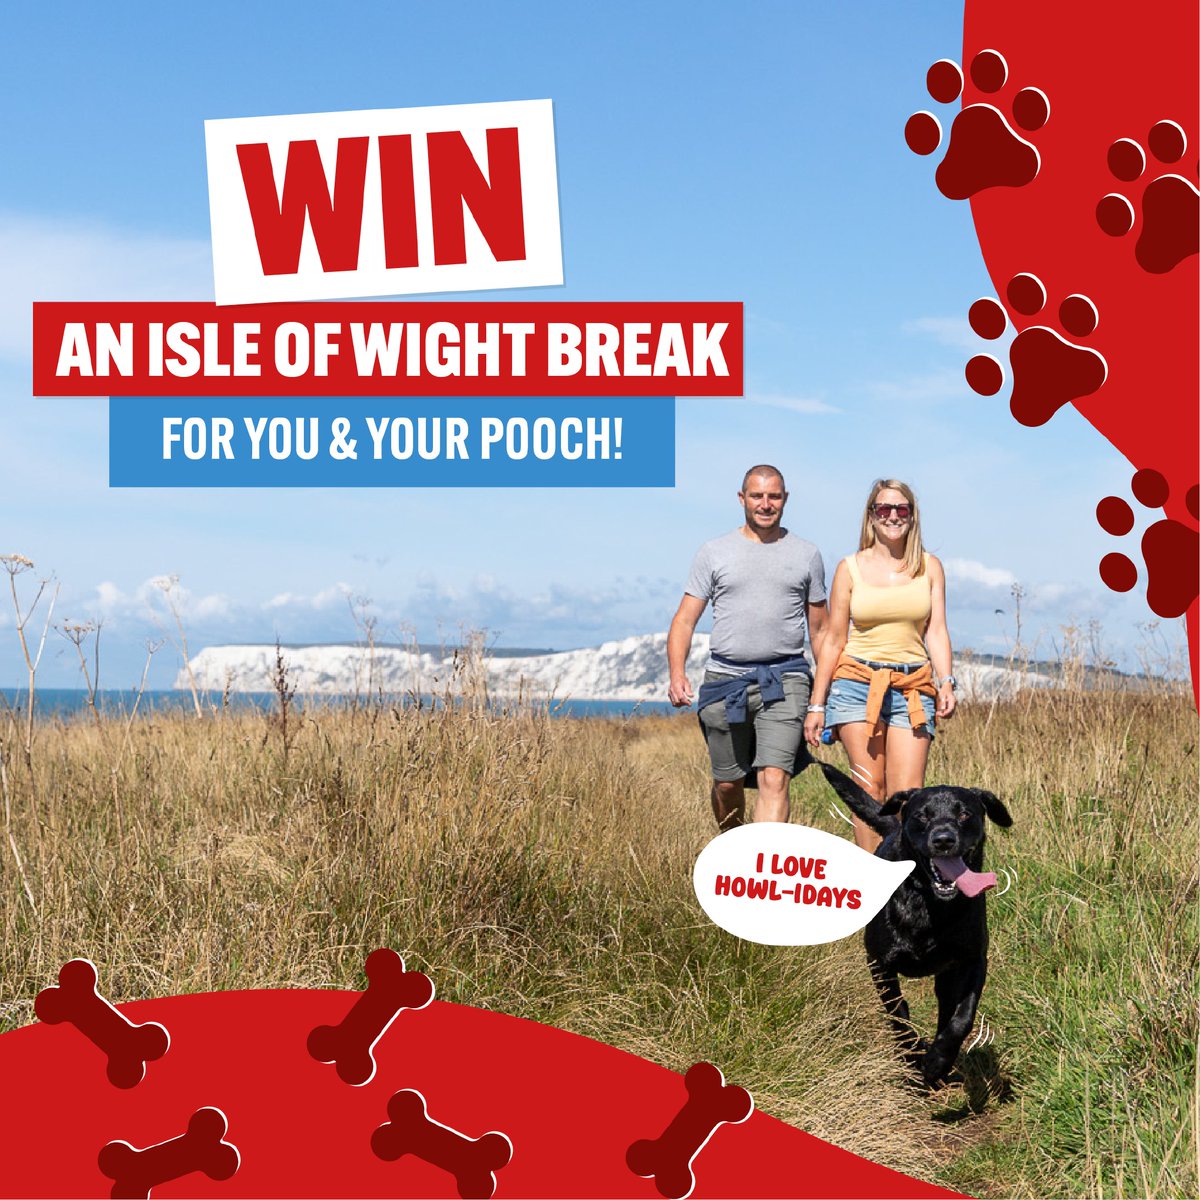 WIN a trip on a ferry For your chance to win this amazing prize simply upgrade your pets microchip to premium to be entered into the prize draw. Each pet upgraded is another chance to win! Find out more at bit.ly/4bxF8Jj @redfunnelferry